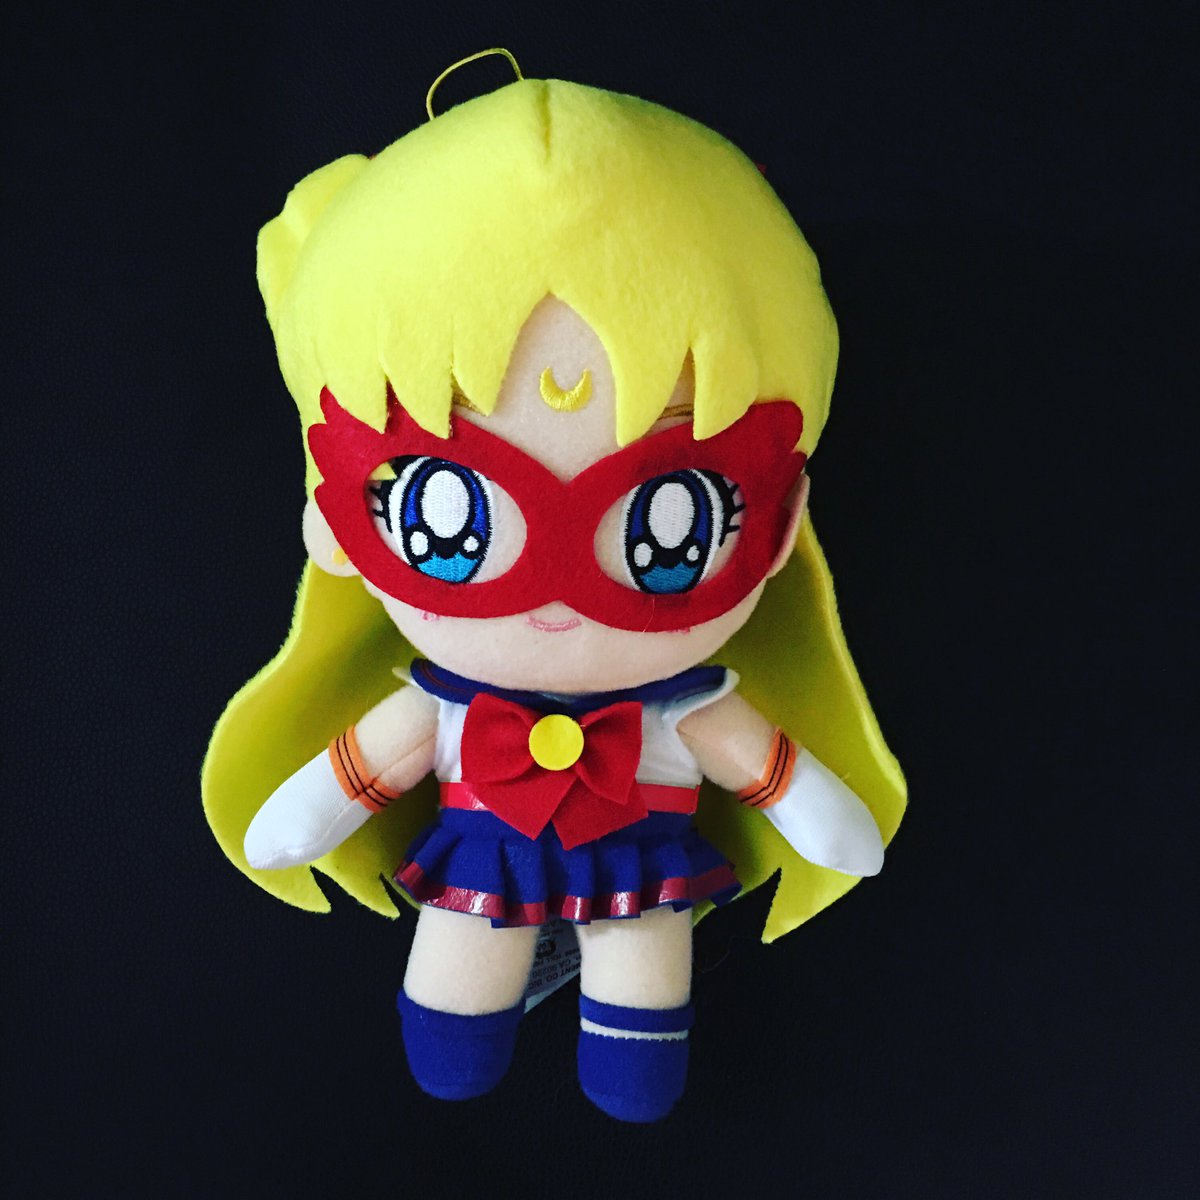 The awesome Sailor V is finally here! #sailormoon